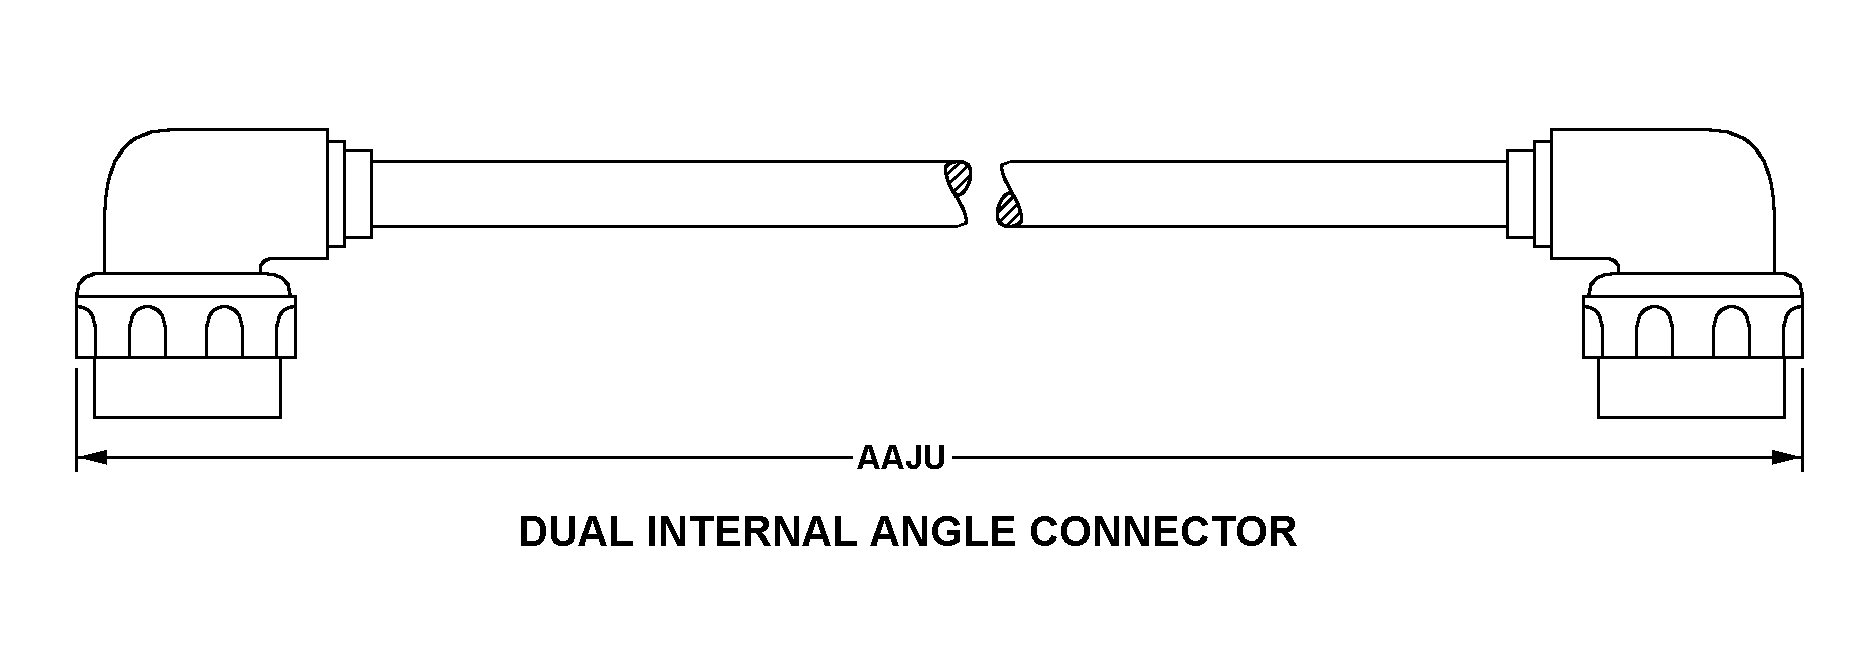 DUAL INTERNAL ANGLE CONNECTOR style nsn 6150-01-091-8656